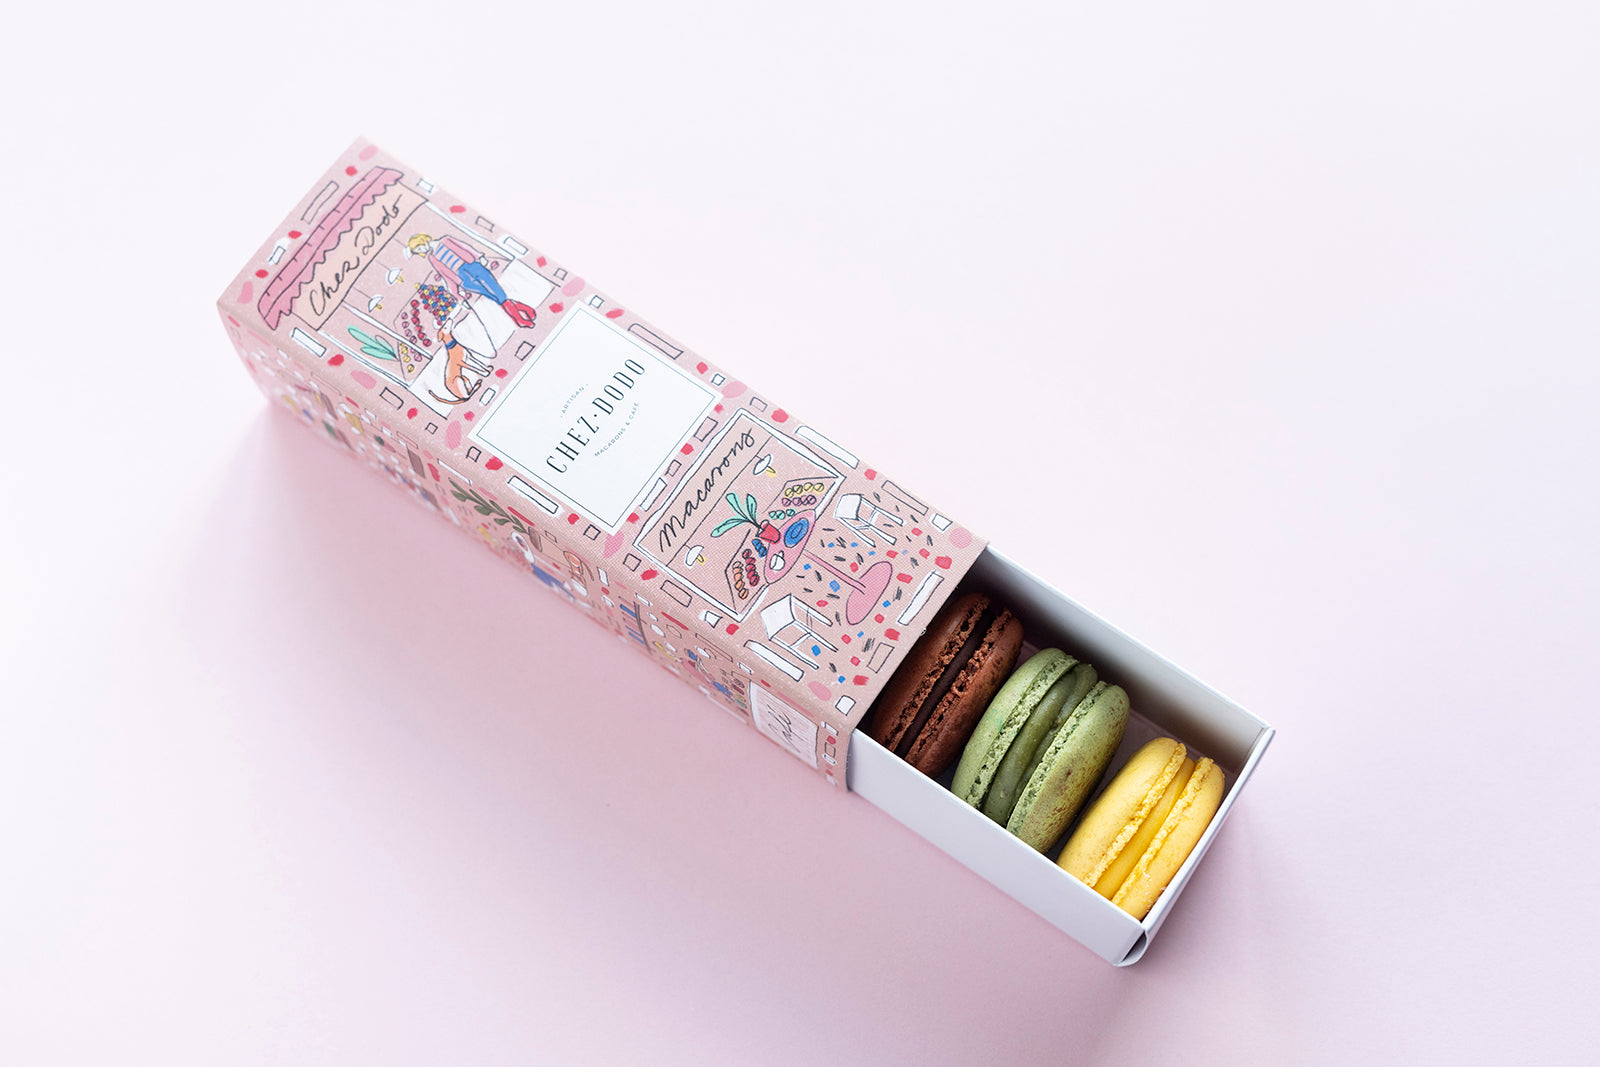 6-piece macaron selection in collection gift box (pink)